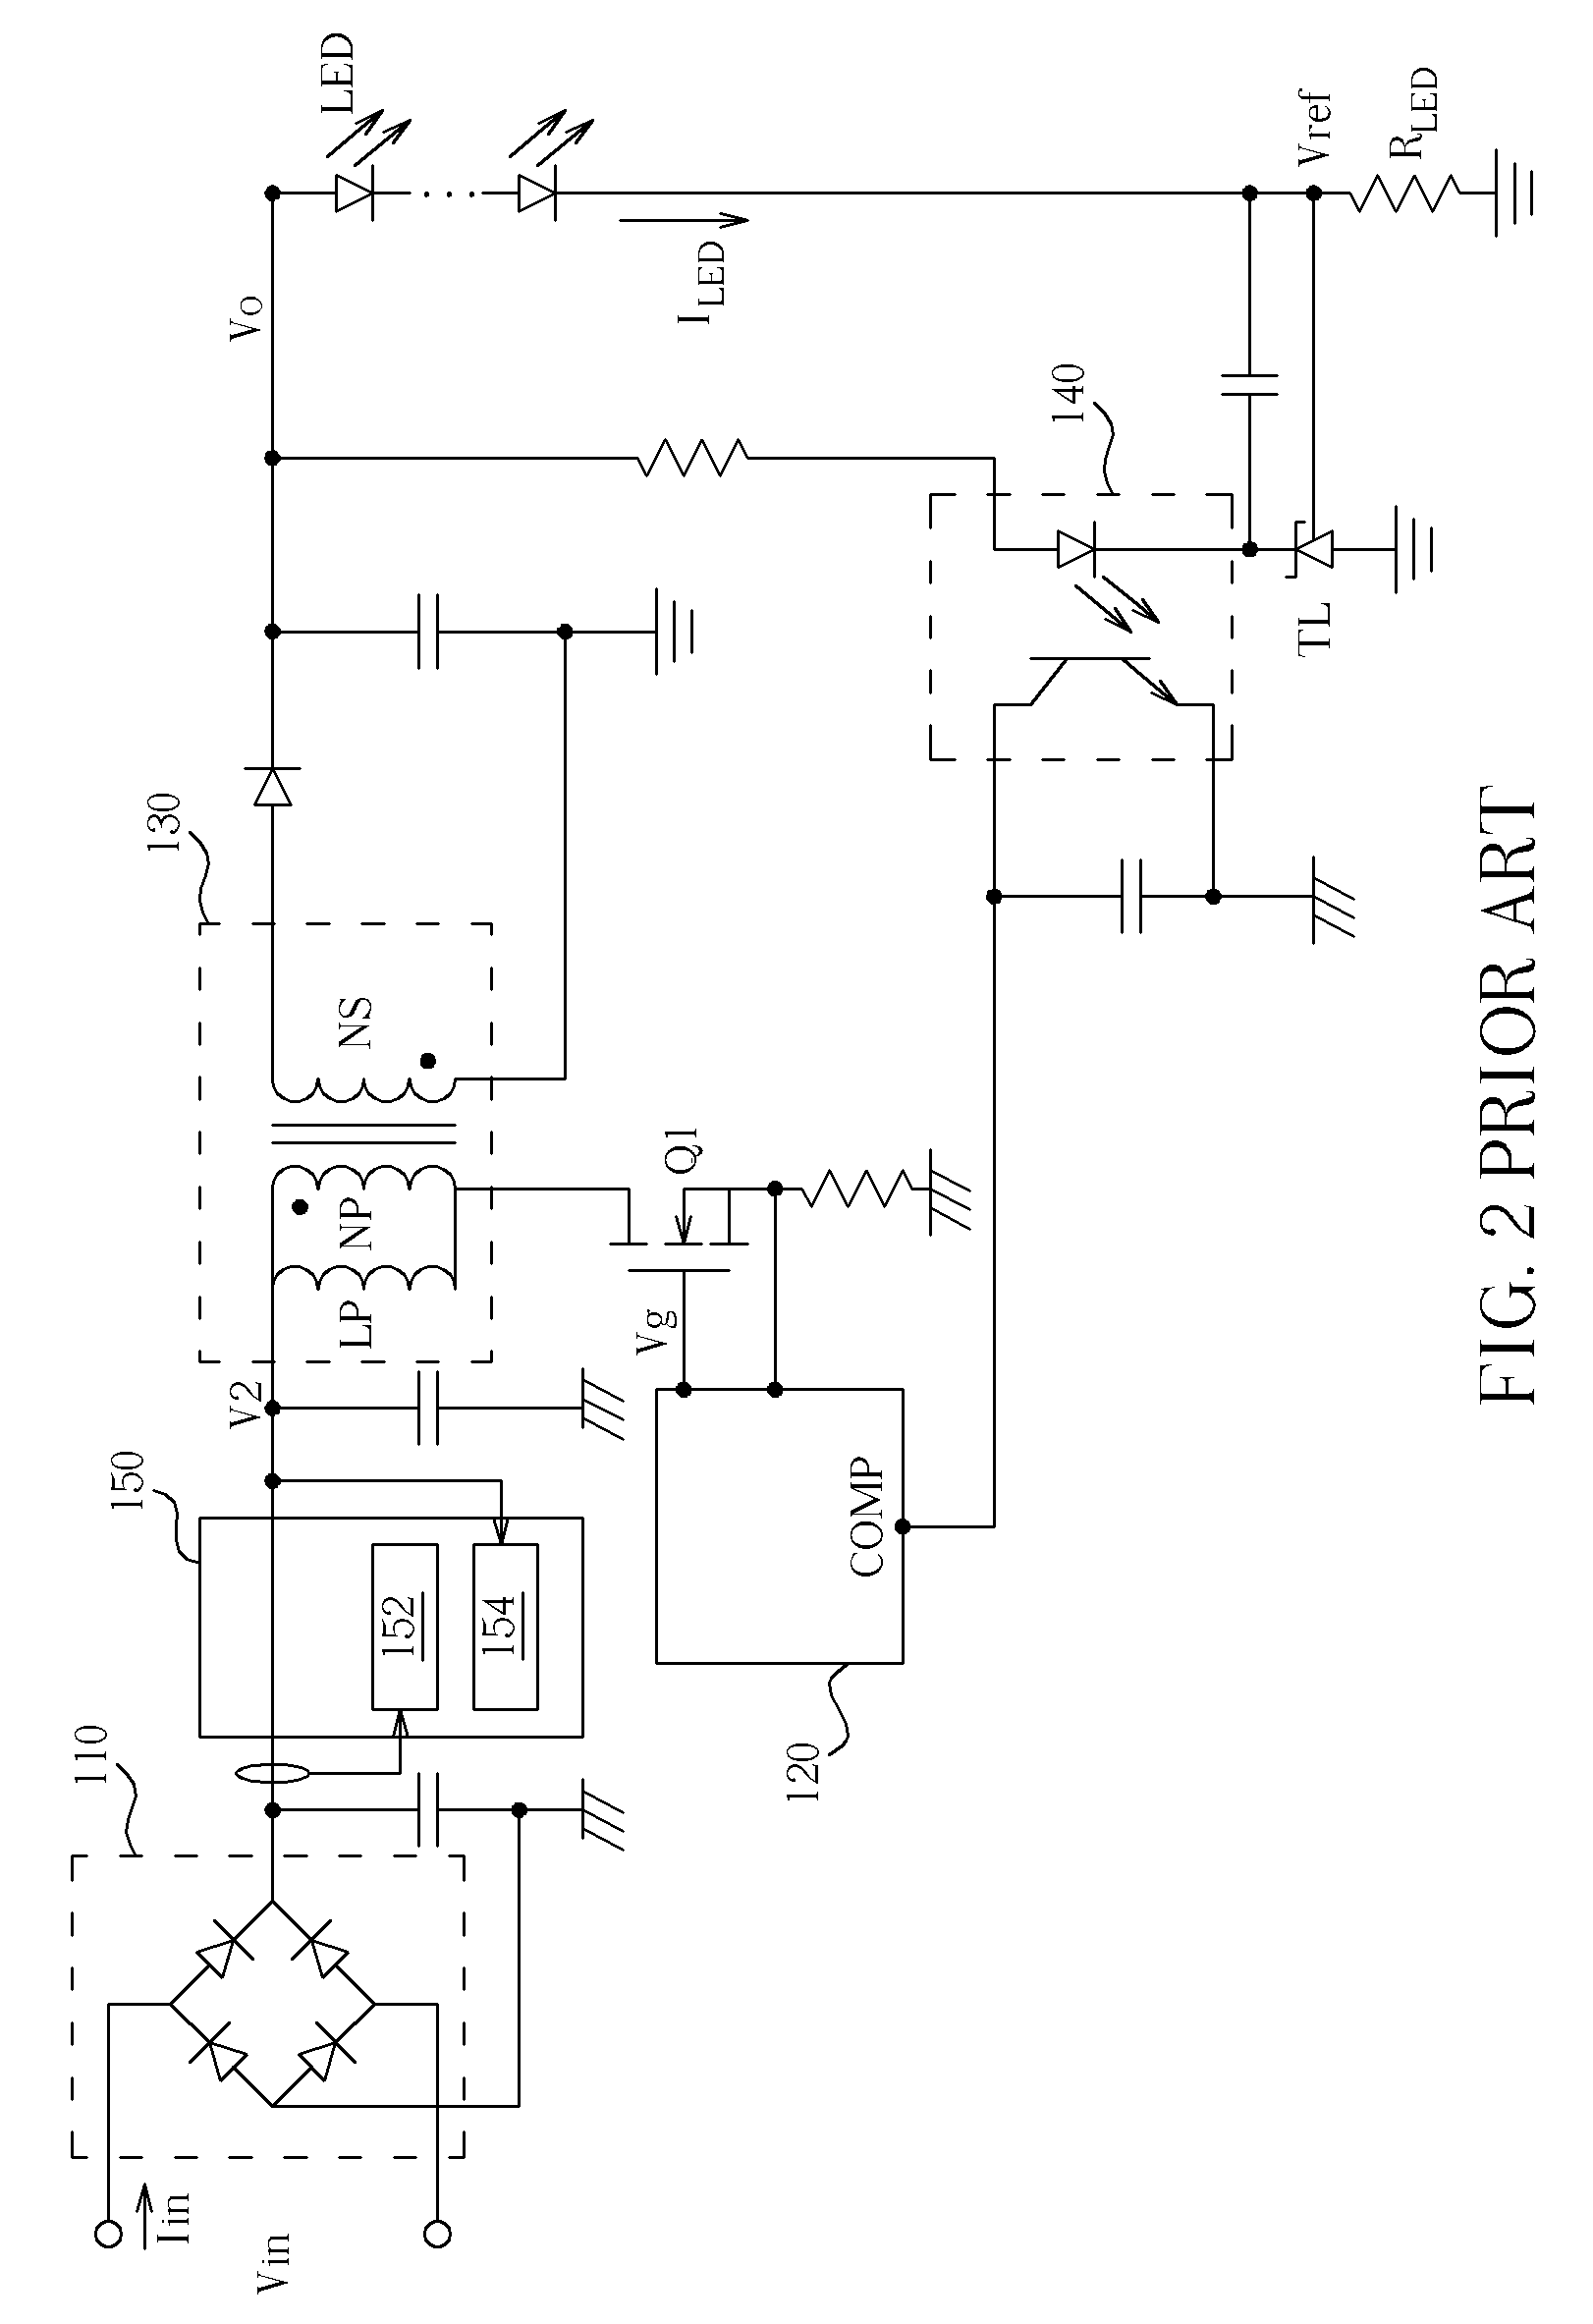 Light emitting diode (LED) driving device